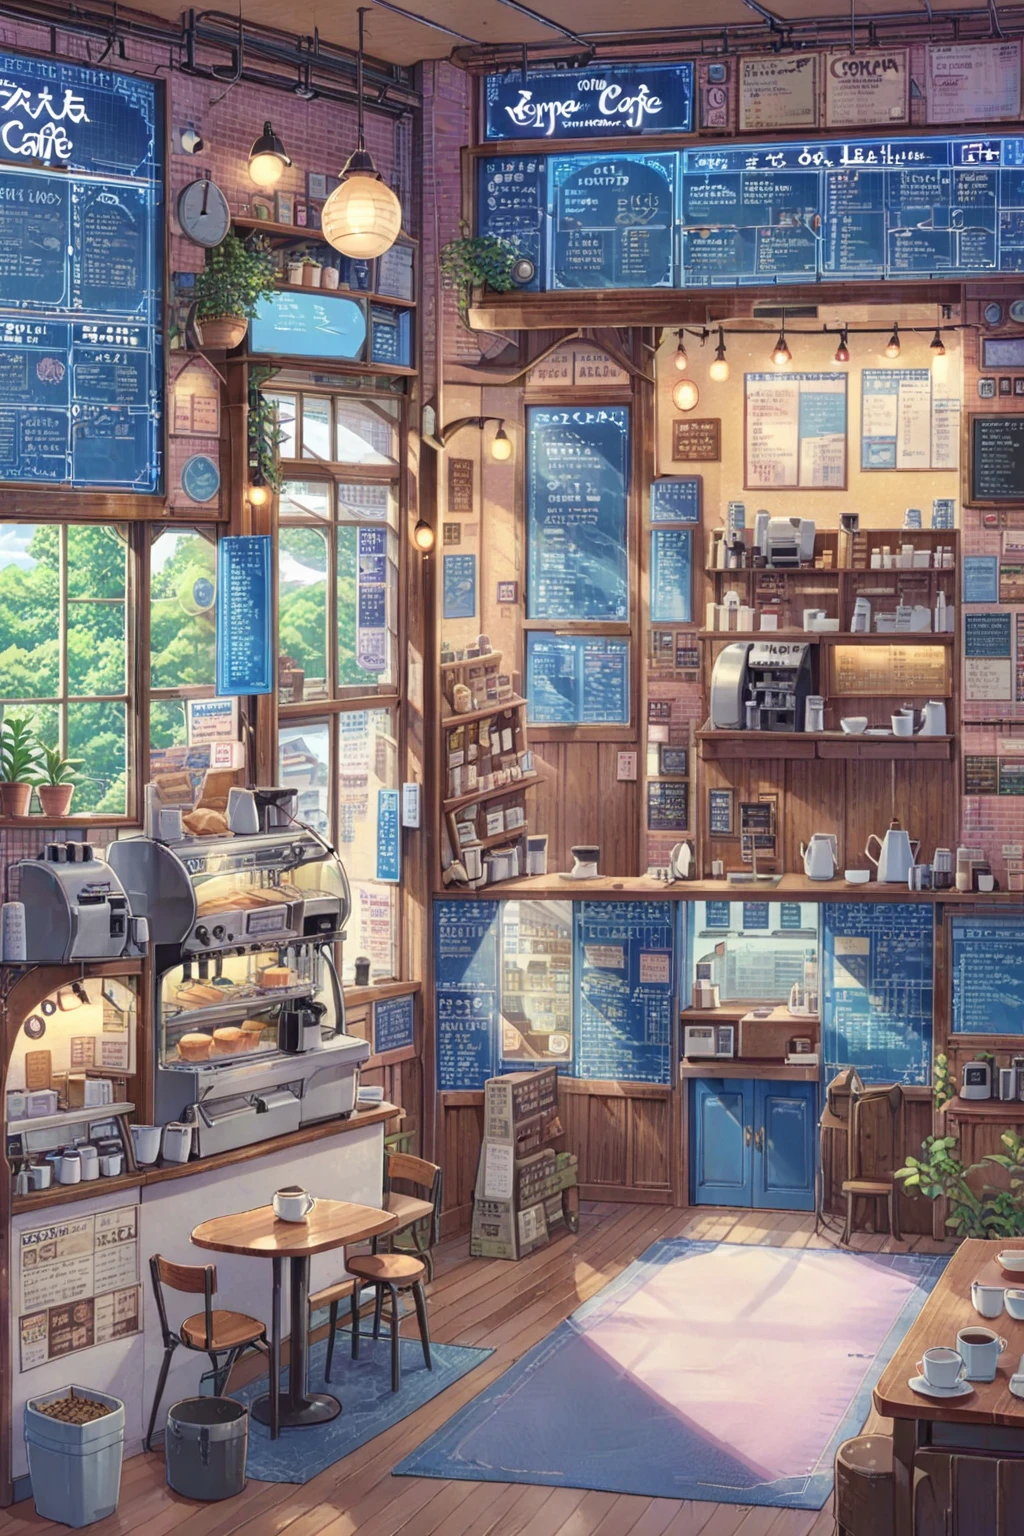 ON PARCHMENT,INK ILLUSTRATION, ((anime:1.4,illustration)),(masterpiece, top quality, best quality),(ultra-detailed, absolutely resolution),((16k, high res)), (((A detailed blueprint of the section of Lofi cafe, a fairytale-style cafe, detailed labeling text, grid lines,)) ((cozy lofi illustration:1.4)), ((anime:1.4, illustration)),(masterpiece, top quality, best quality),(ultra-detailed, absolutely resolution),((16k, high res)) BREAK {lofi art, style of Laurie Greasley, style of Makoto Shinkai, anime aesthetic},